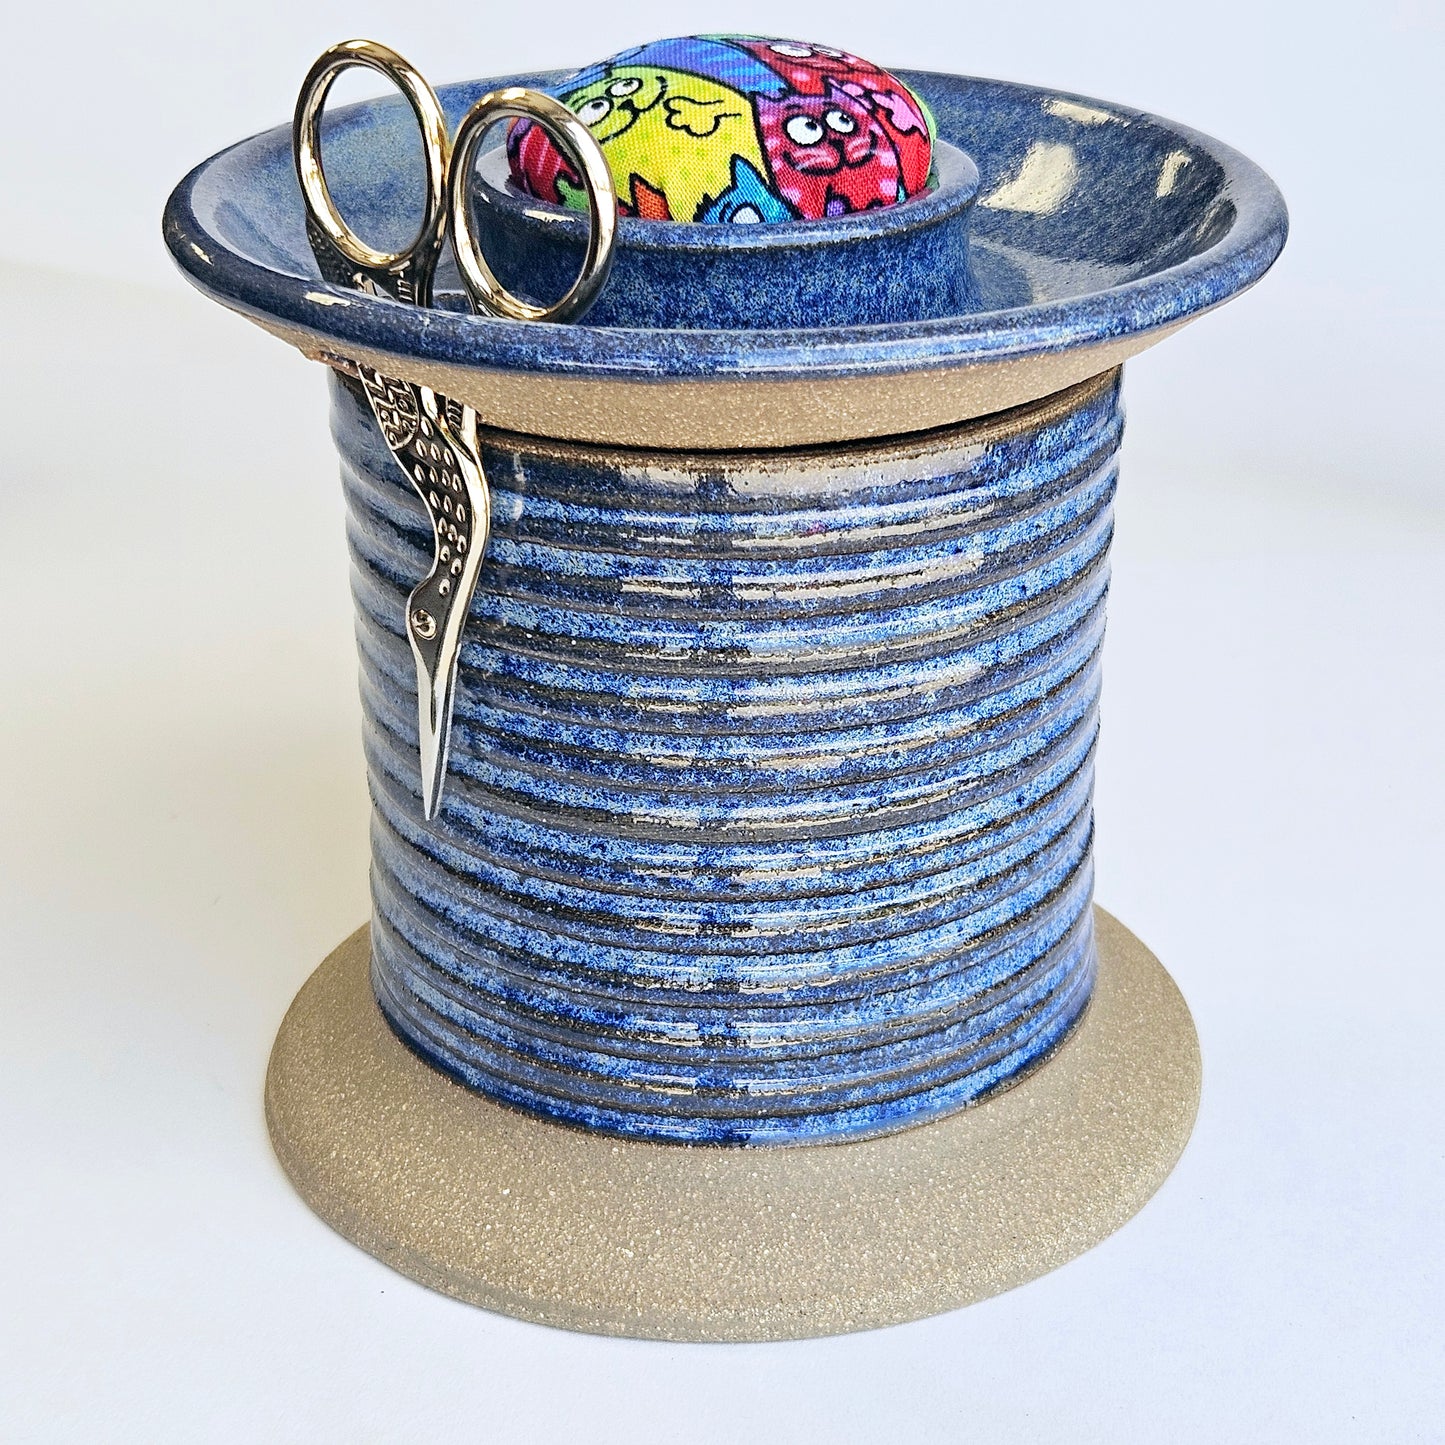 Handmade Sewing Station Caddy, Oversized Spool Design Storage, Unique Quilter's Gift in Blue